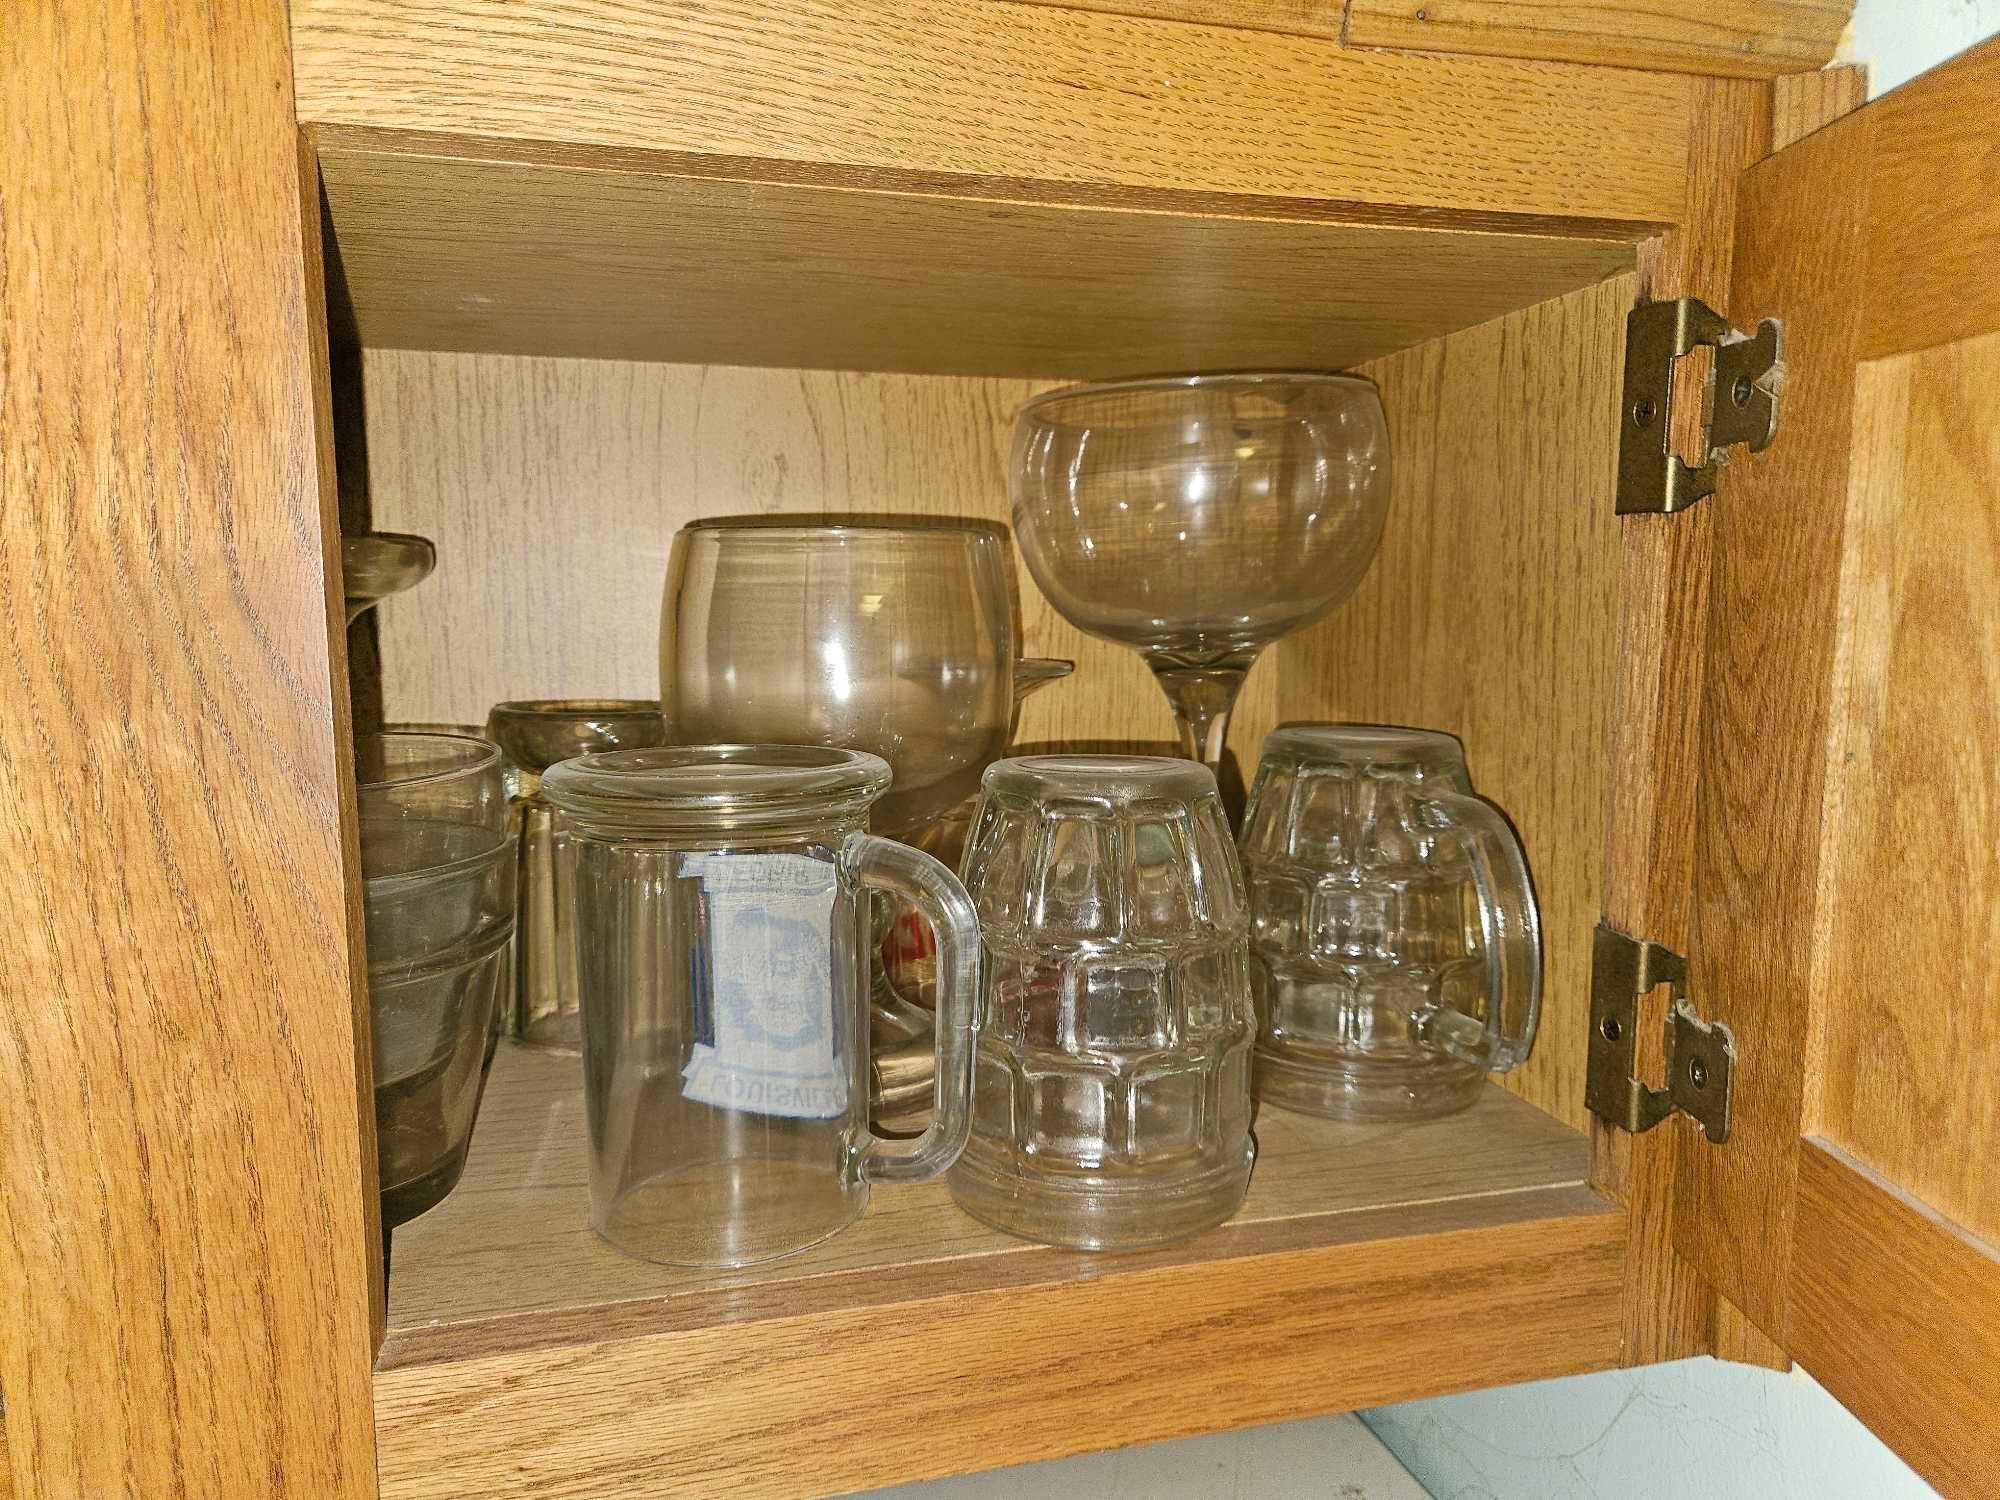 Contents of Kitchen Cabinets - Glassware, Kitchenware, Flatware, & Cooking Items